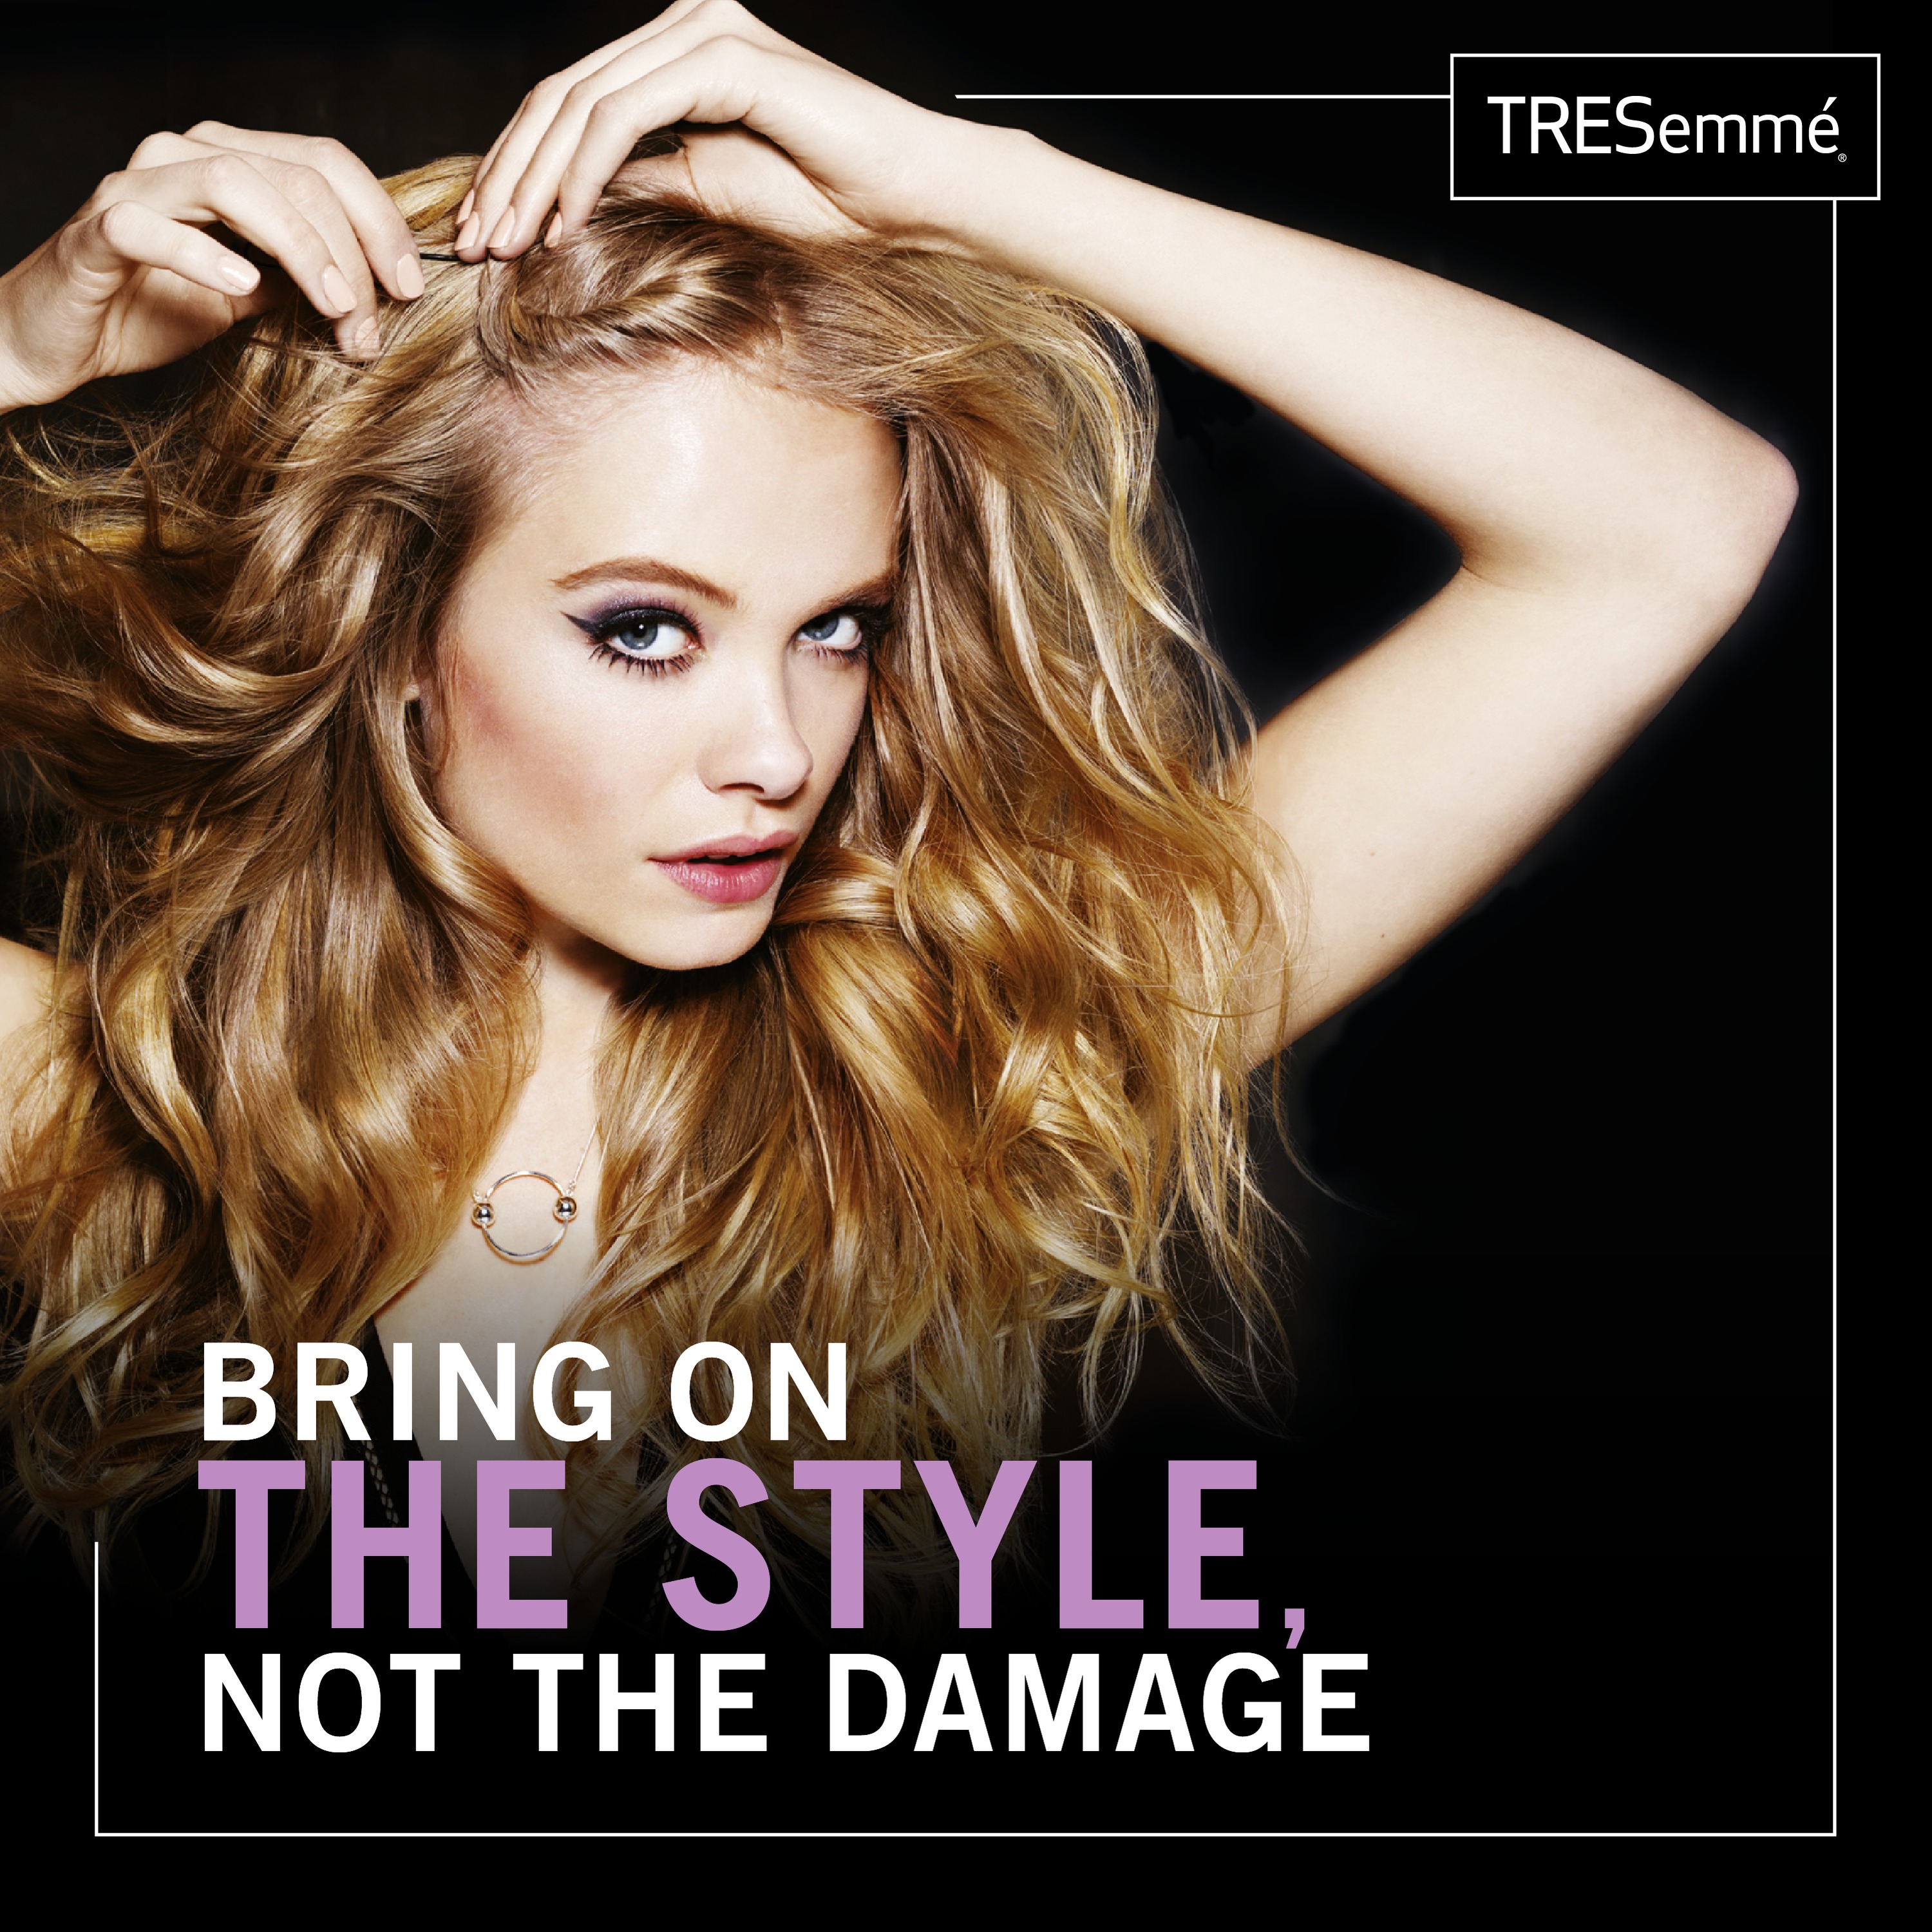 TRESemme 3-Pc Healthy & Protected Blowout Gift Set Repair and Protect with Hair Dryer (Shampoo, Conditioner) ($24.84 Value) - image 6 of 11